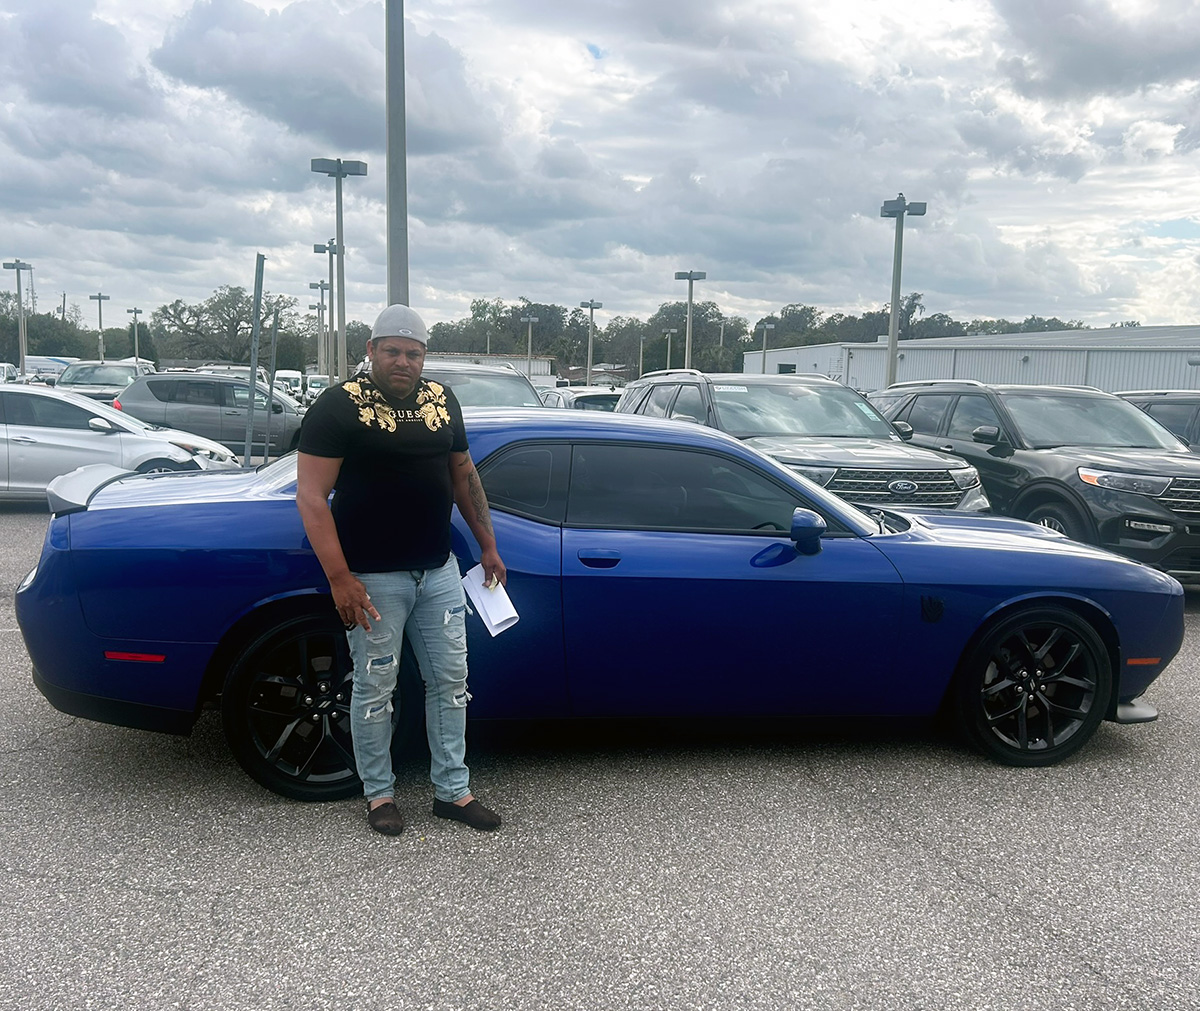 We say it all of the time! Get what you really want at #LakelandAutomall just like Renier Burey did when he picked up his #DodgeChallenger... #GreatService & a #GreatDeal were included! #Nice #Congratulations Reneir & #ThankYou for choosing us - We're here for you! #ShopOnline